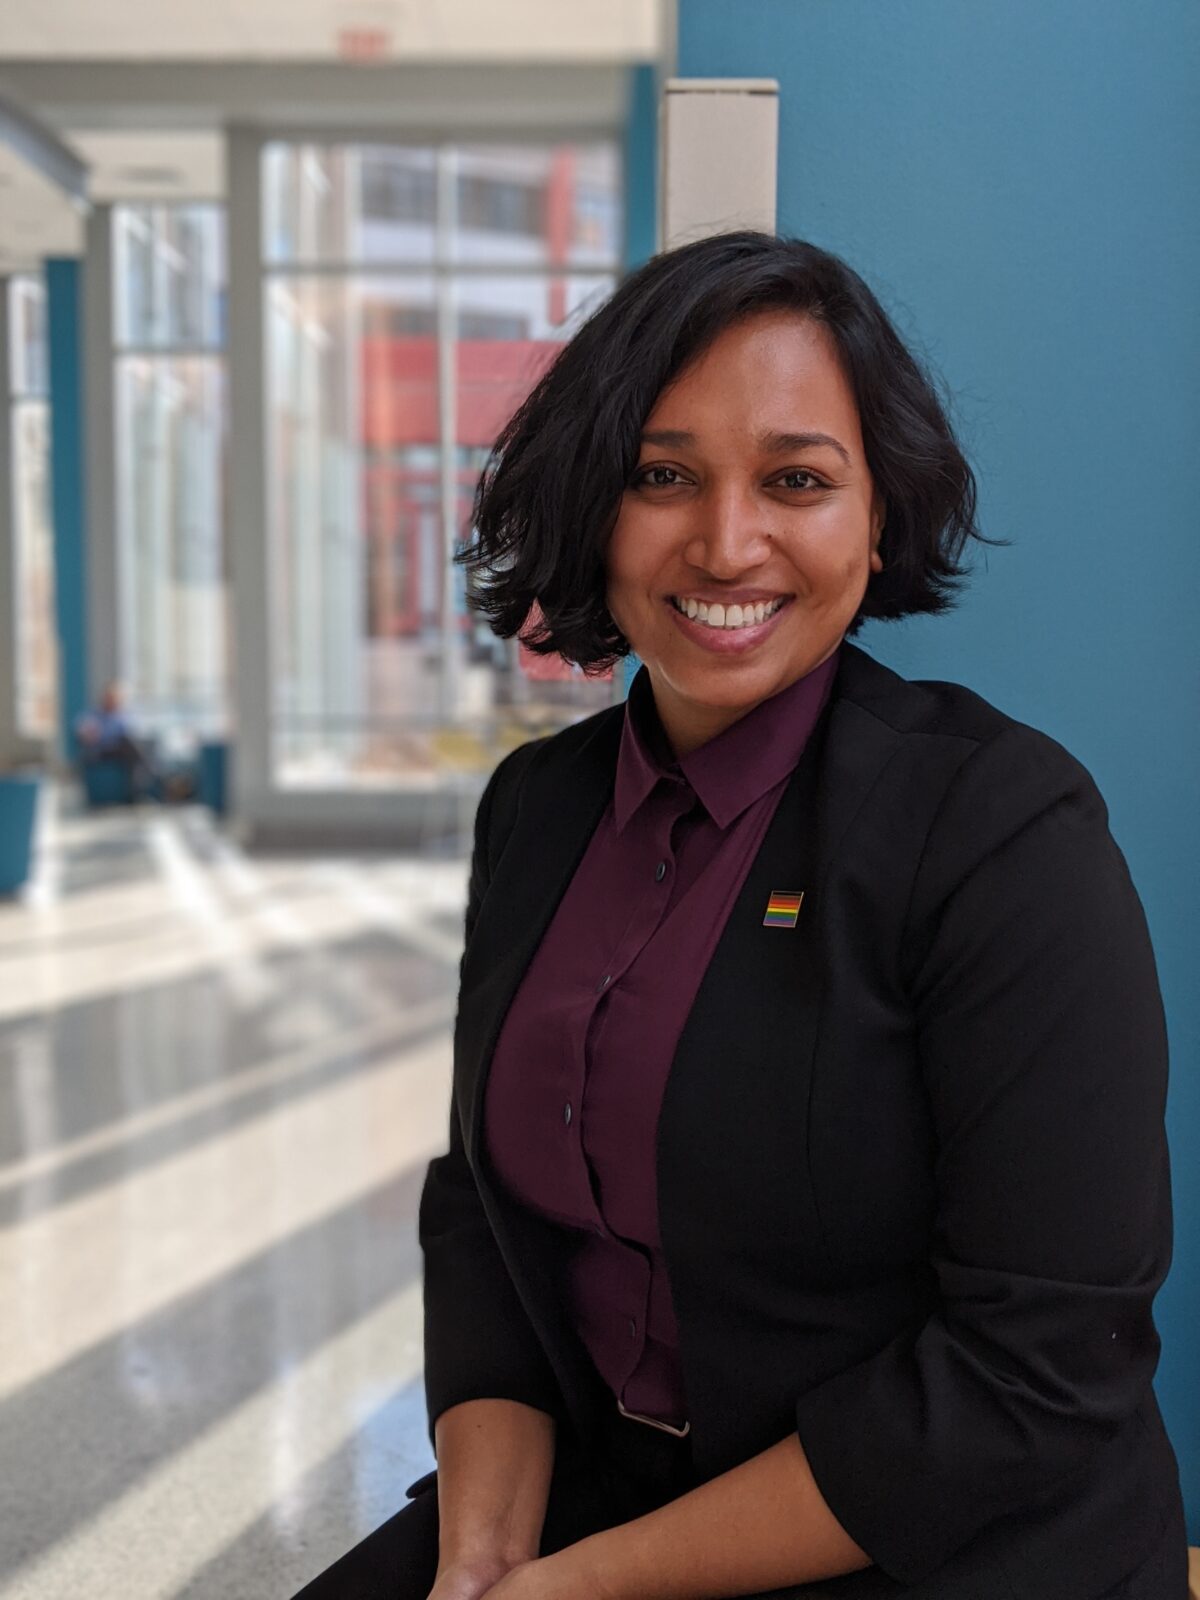 Sayeeda Rashid leverages her position as a recent School of Social Policy & Practice graduate to work for social change in Philadelphia’s Office of LGBT Affairs. (Image: Philadelphia Mayor’s Office)